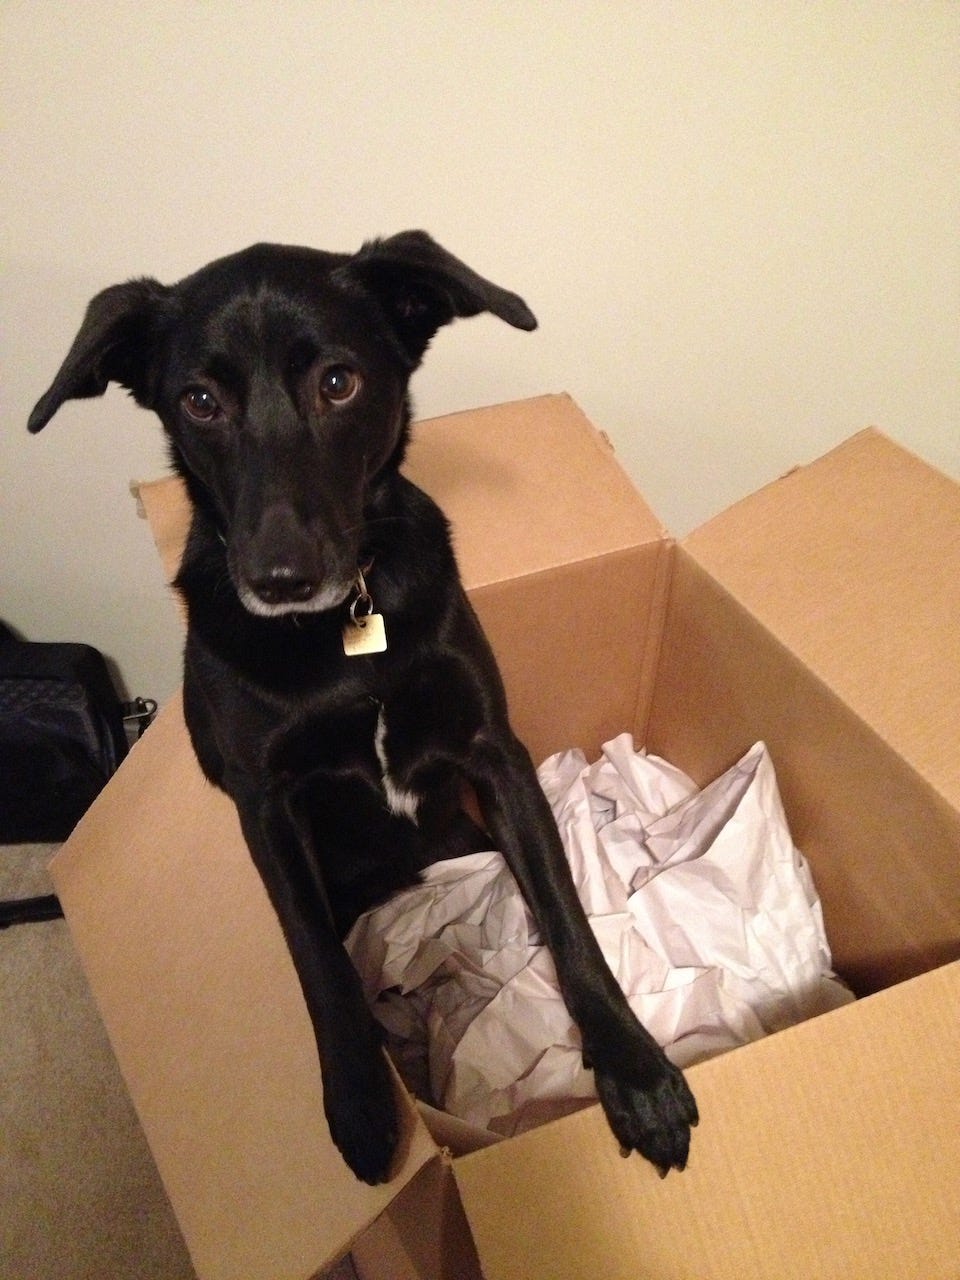 Black puppy climbing out of a cardboard moving box.